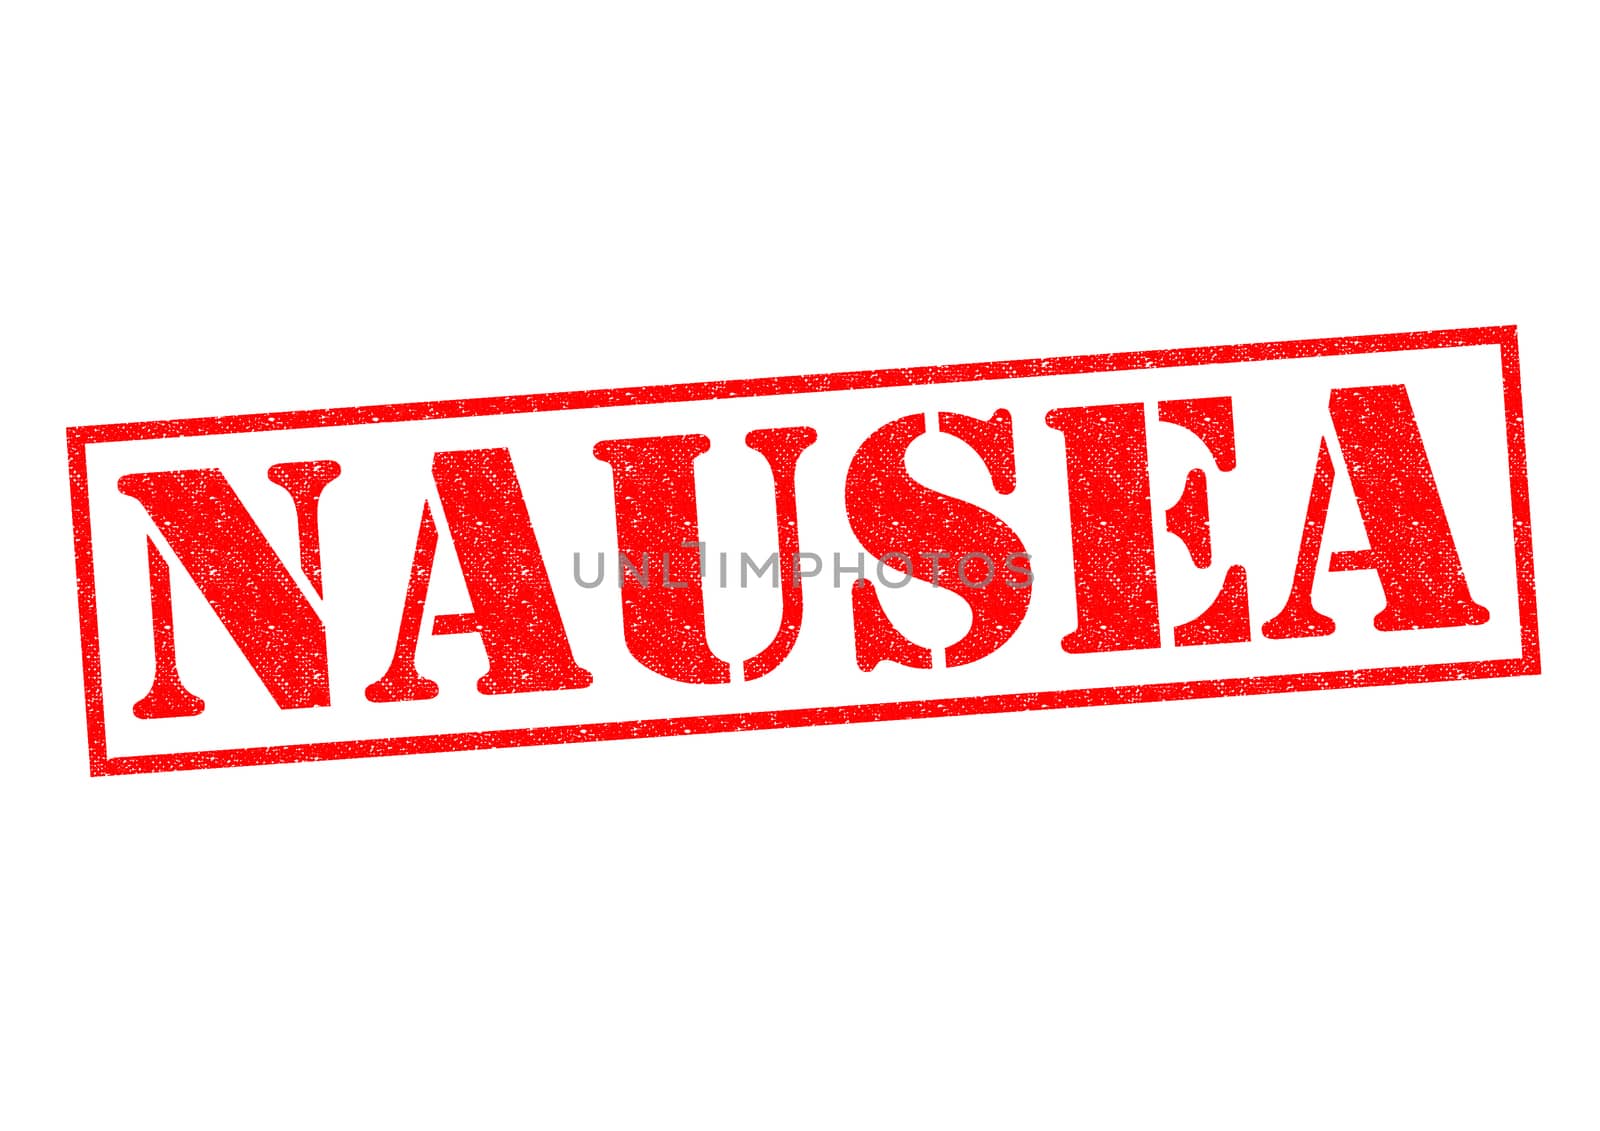 NAUSEA red Rubber Stamp over a white background.